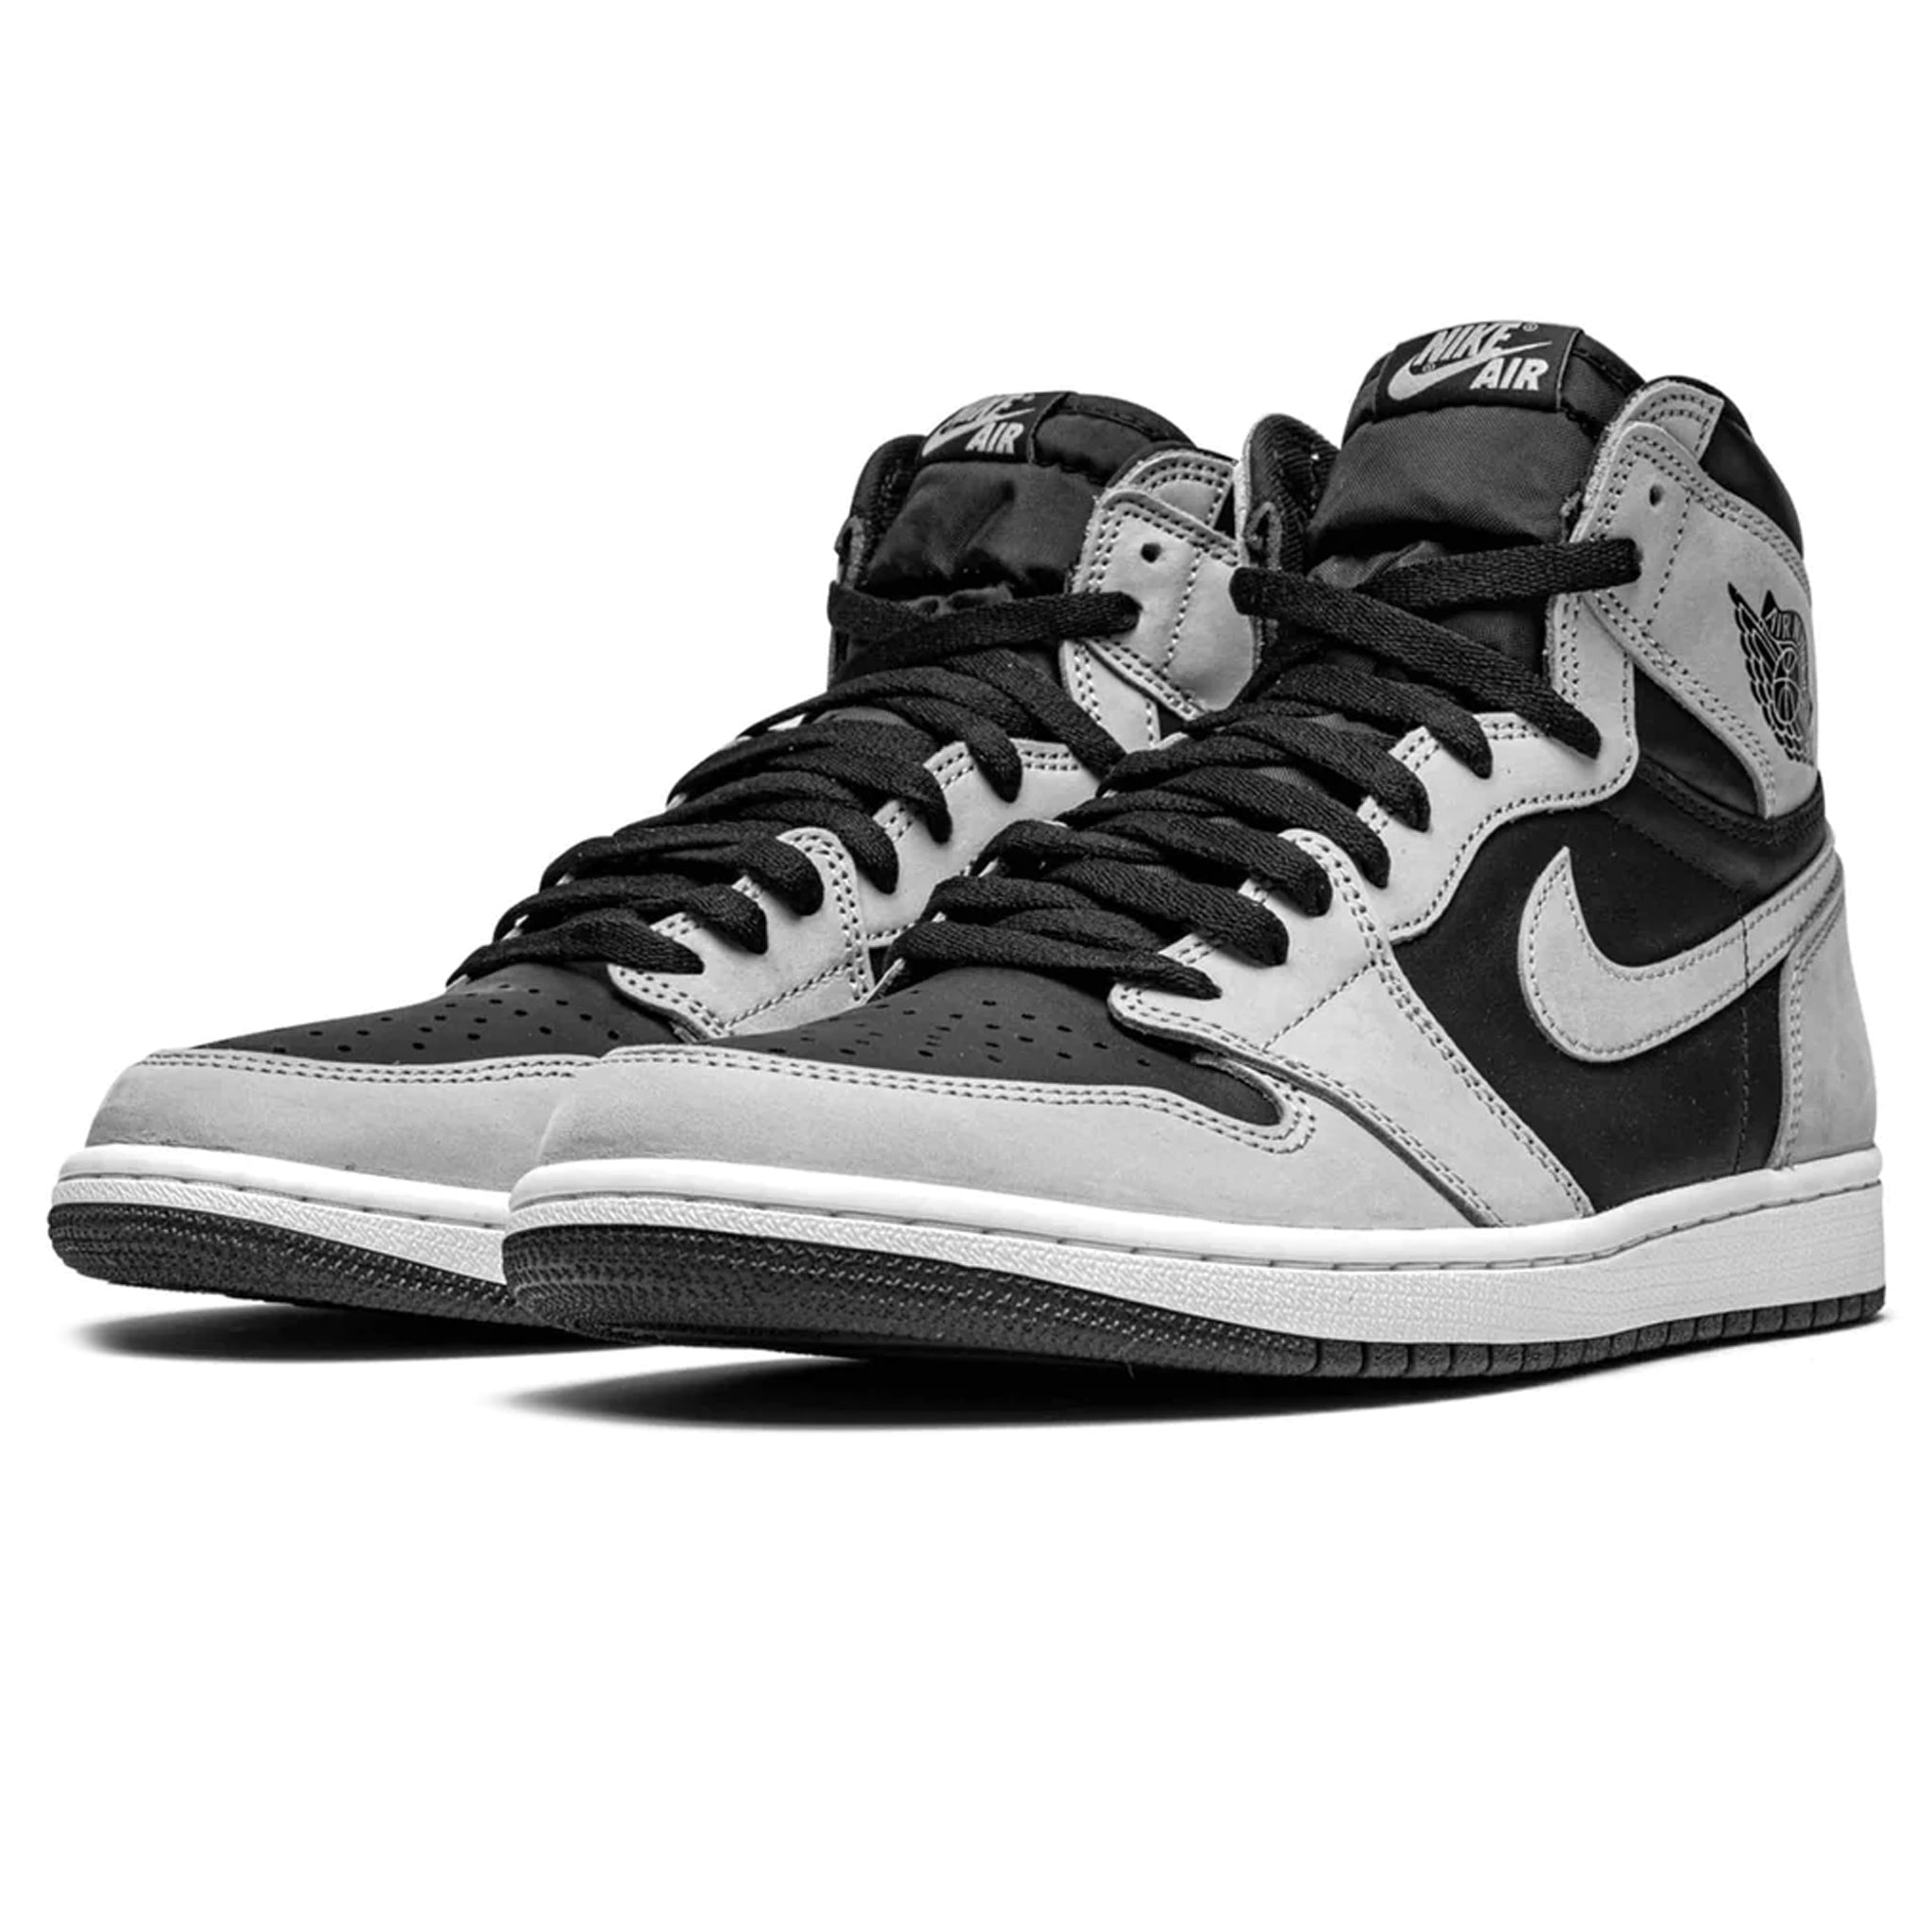 Front side view of Air Jordan 1 Retro High Shadow 2.0 555088-035